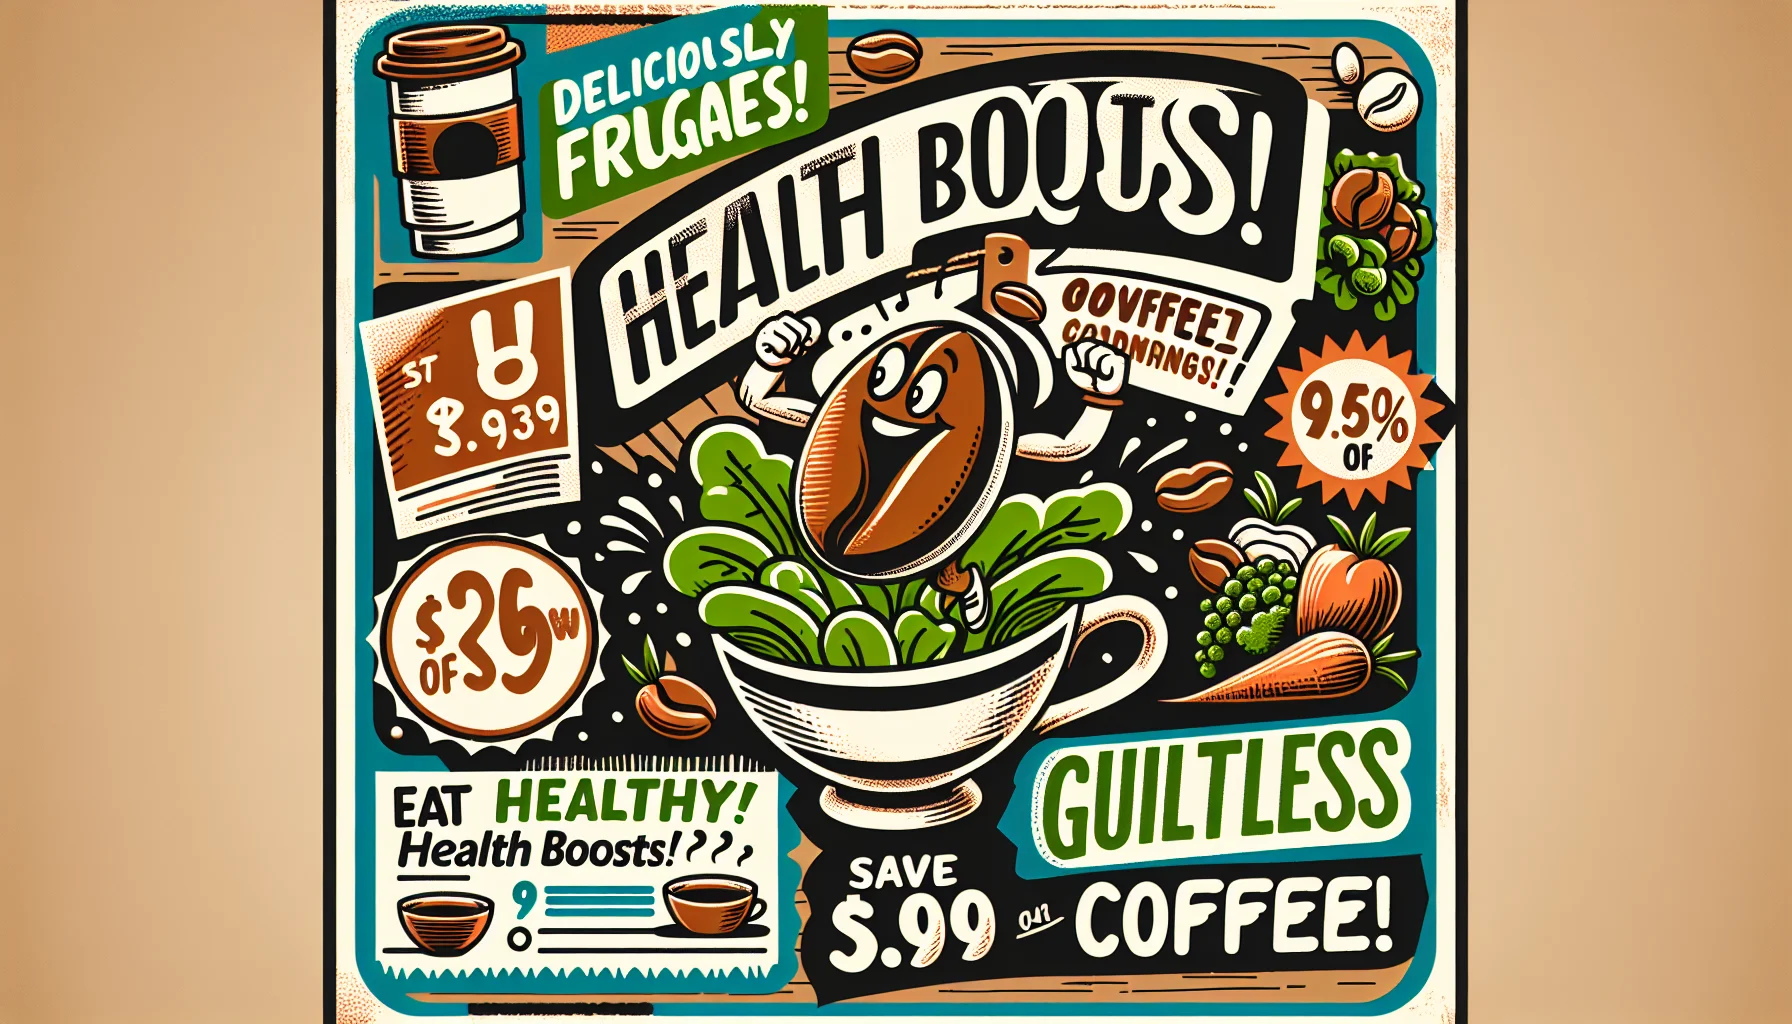 Imagine a humorous and enticing coffee label design. The main colors for the label are a warm, rustic brown contrasted with fresh hues of green to symbolize the balance of coffee and healthy eating. The centerpiece of the label is an illustration of a playful coffee bean cheering as it jumps into a giant salad bowl. Accompanying this, there are bold, stylized texts promising 'Deliciously Frugal Health Boosts' and 'Eat Healthy, Save Money with our Guiltless Coffee!'. Small, hand-drawn doodles of discounted price tags, assorted veggies, and coffee cups should be scattered around the label to add charm and further promote the message of affordable healthy eating.